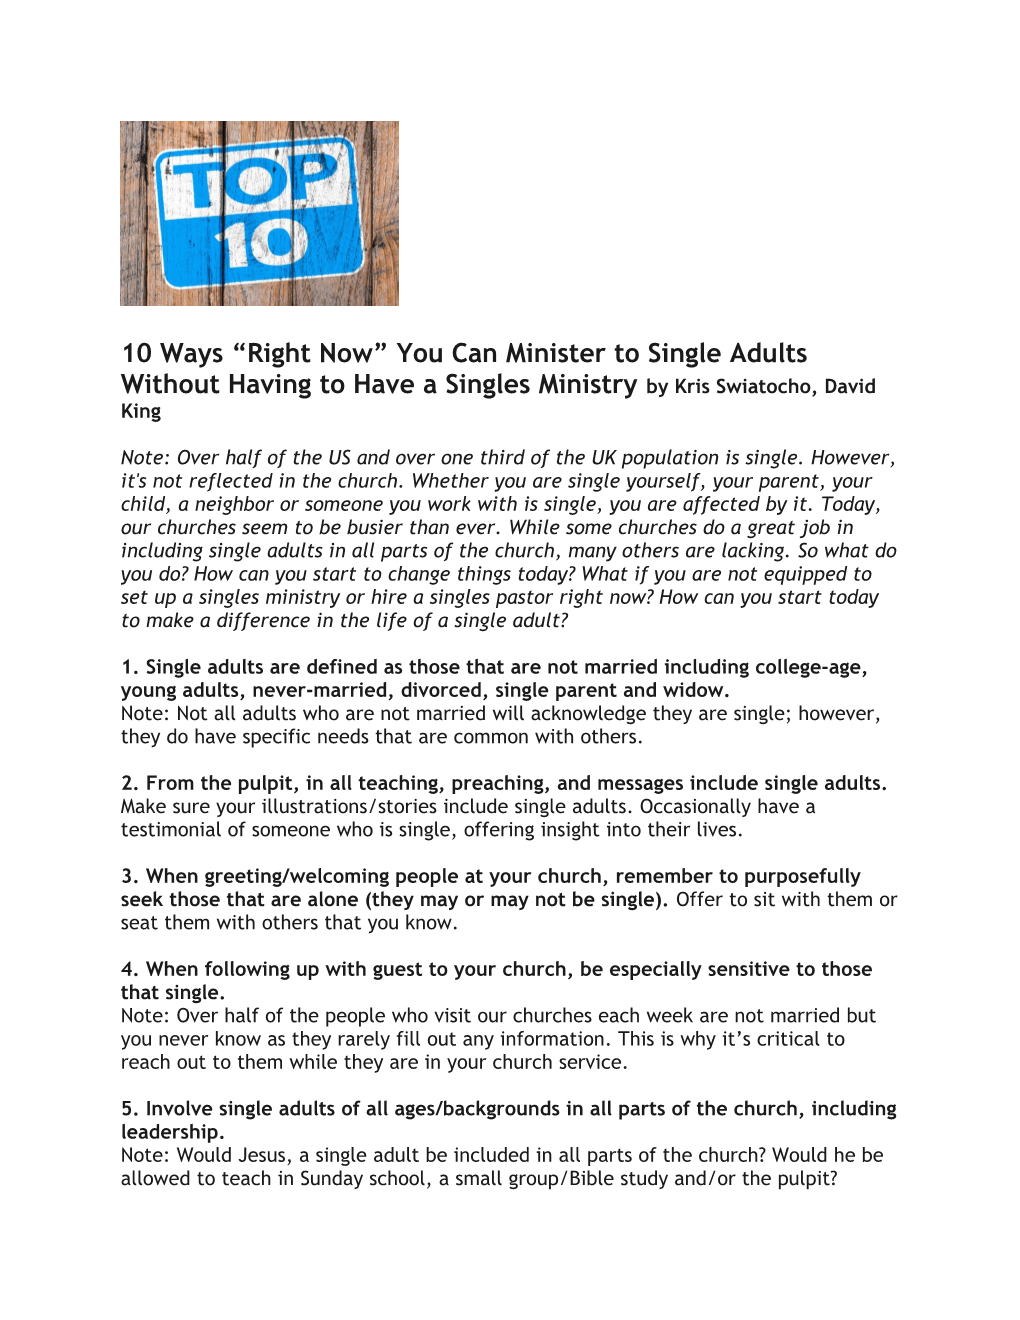 10 Ways Right Now You Can Minister to Single Adults Without Having to Have a Singles Ministryby